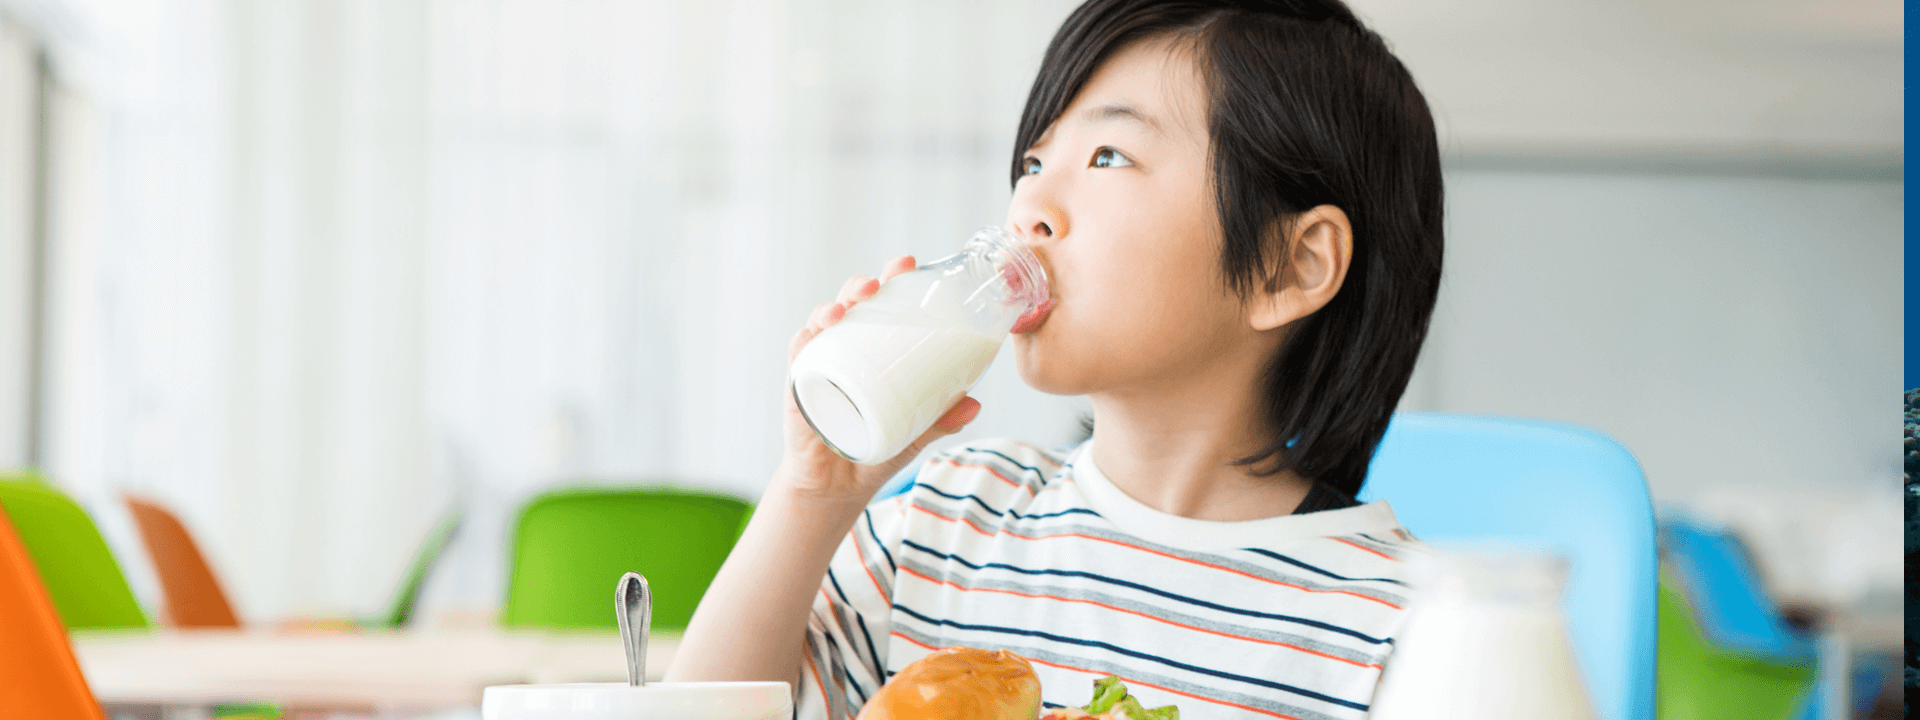 This Type Of Diet Could Ensure Your Child Succeeds In School (And Beyond)